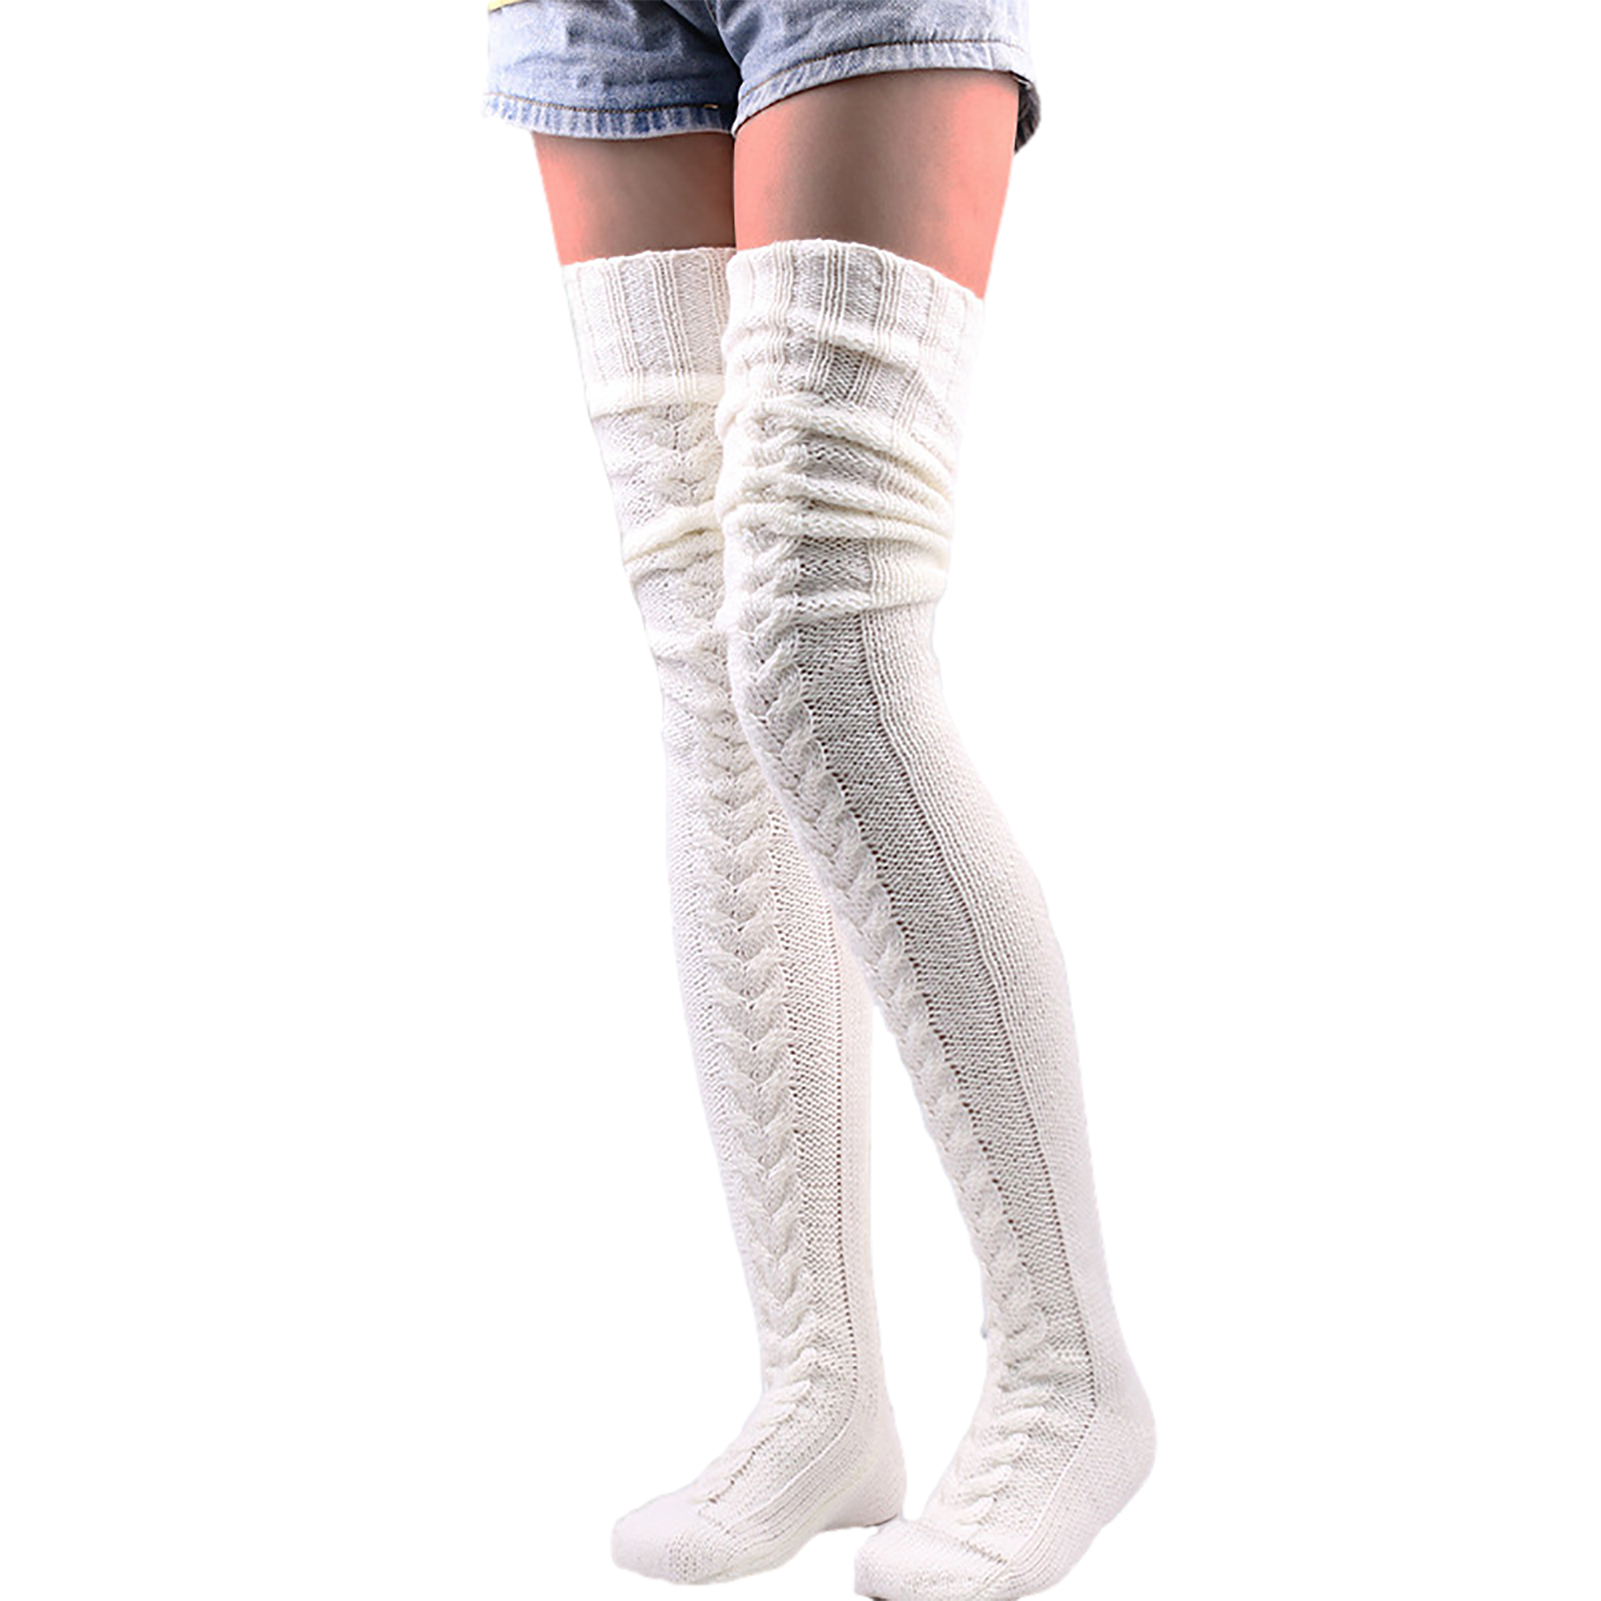 (🔥Early Christmas Sale- SAVE 48% OFF) Thick Slim Warm Knitted Stockings[free size] -BUY 3 GET 10% OFF & FREE SHIPPING